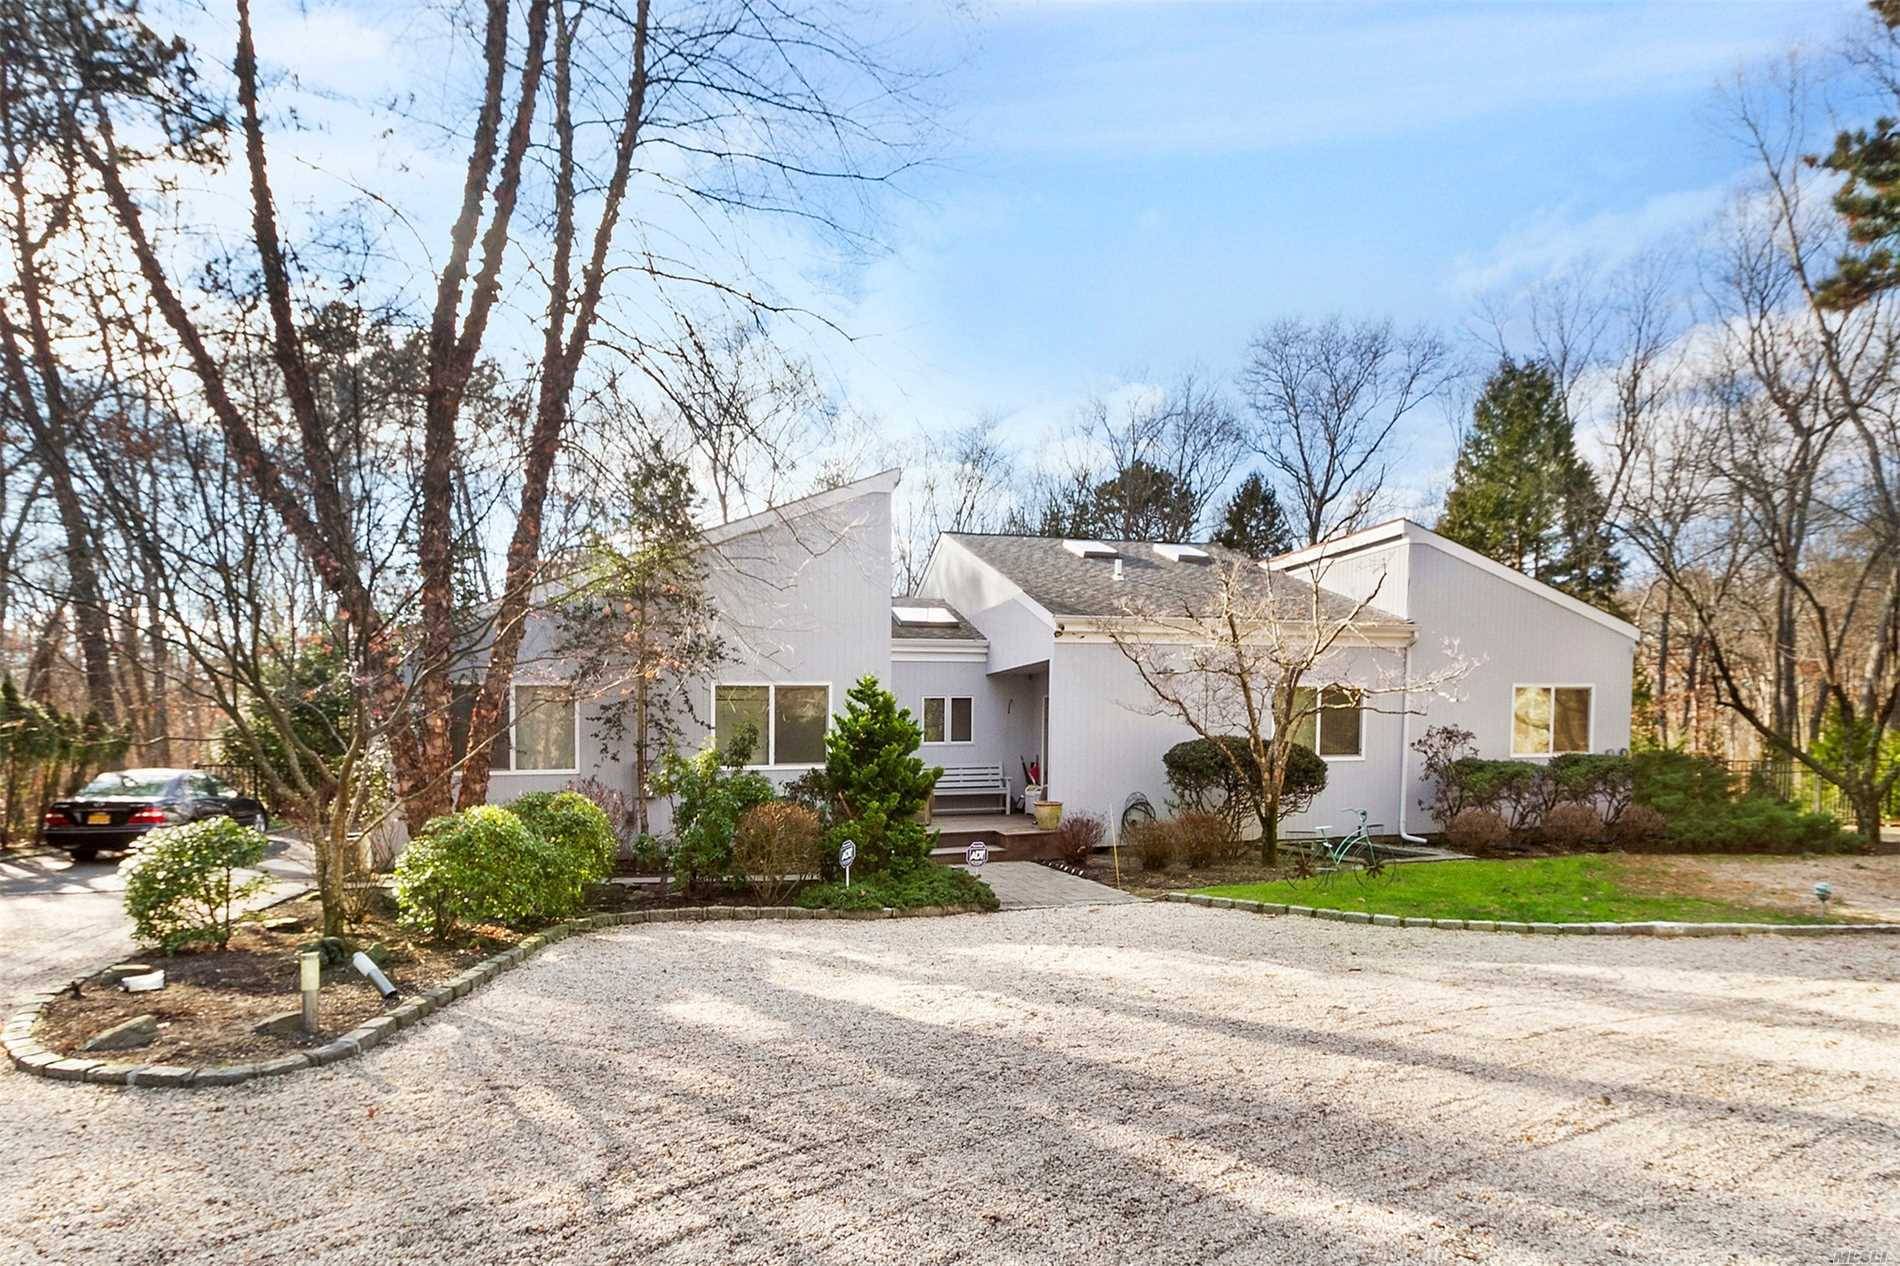 This Ultra-Chic Home Is Quick Ride From Nyc , Includes Private Beach Access Close To Private Airport And Many Golf Courses.